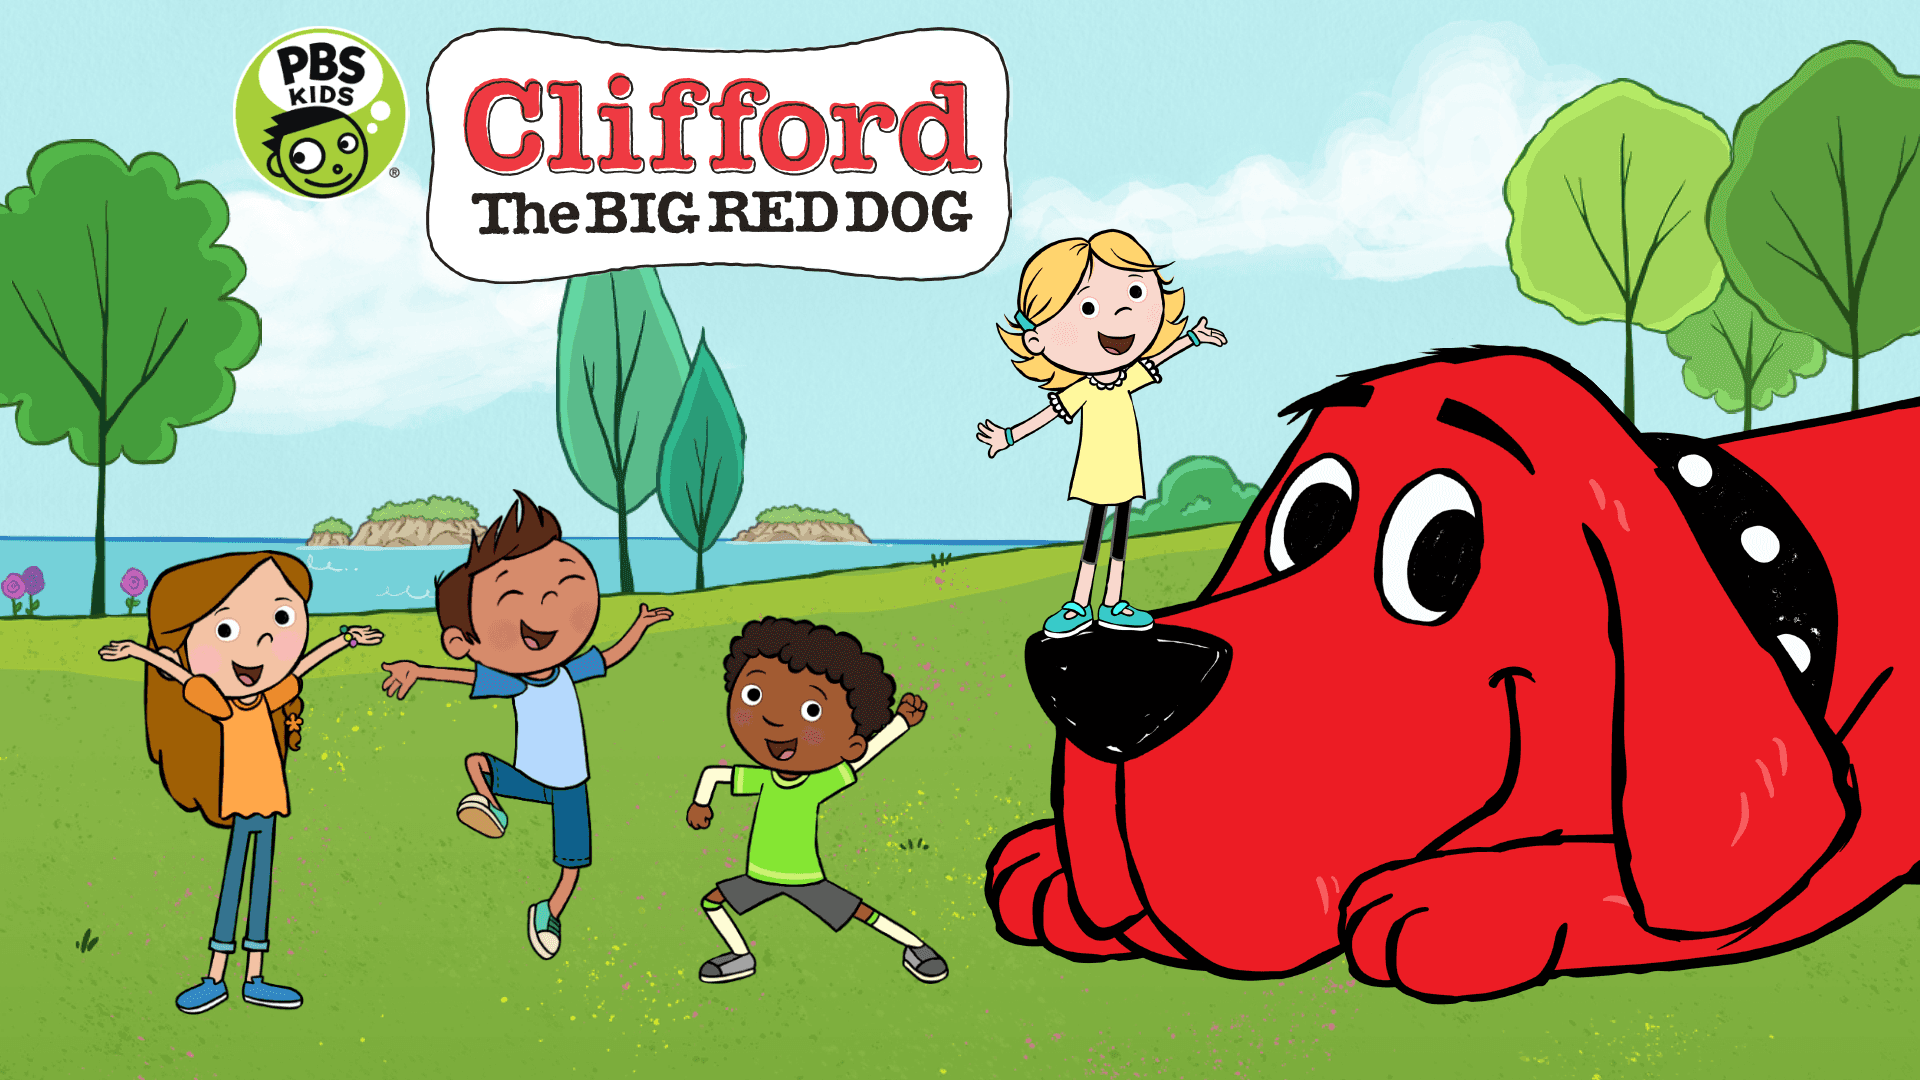 Celebrate the magic of adventure with Clifford The Big Red Dog!